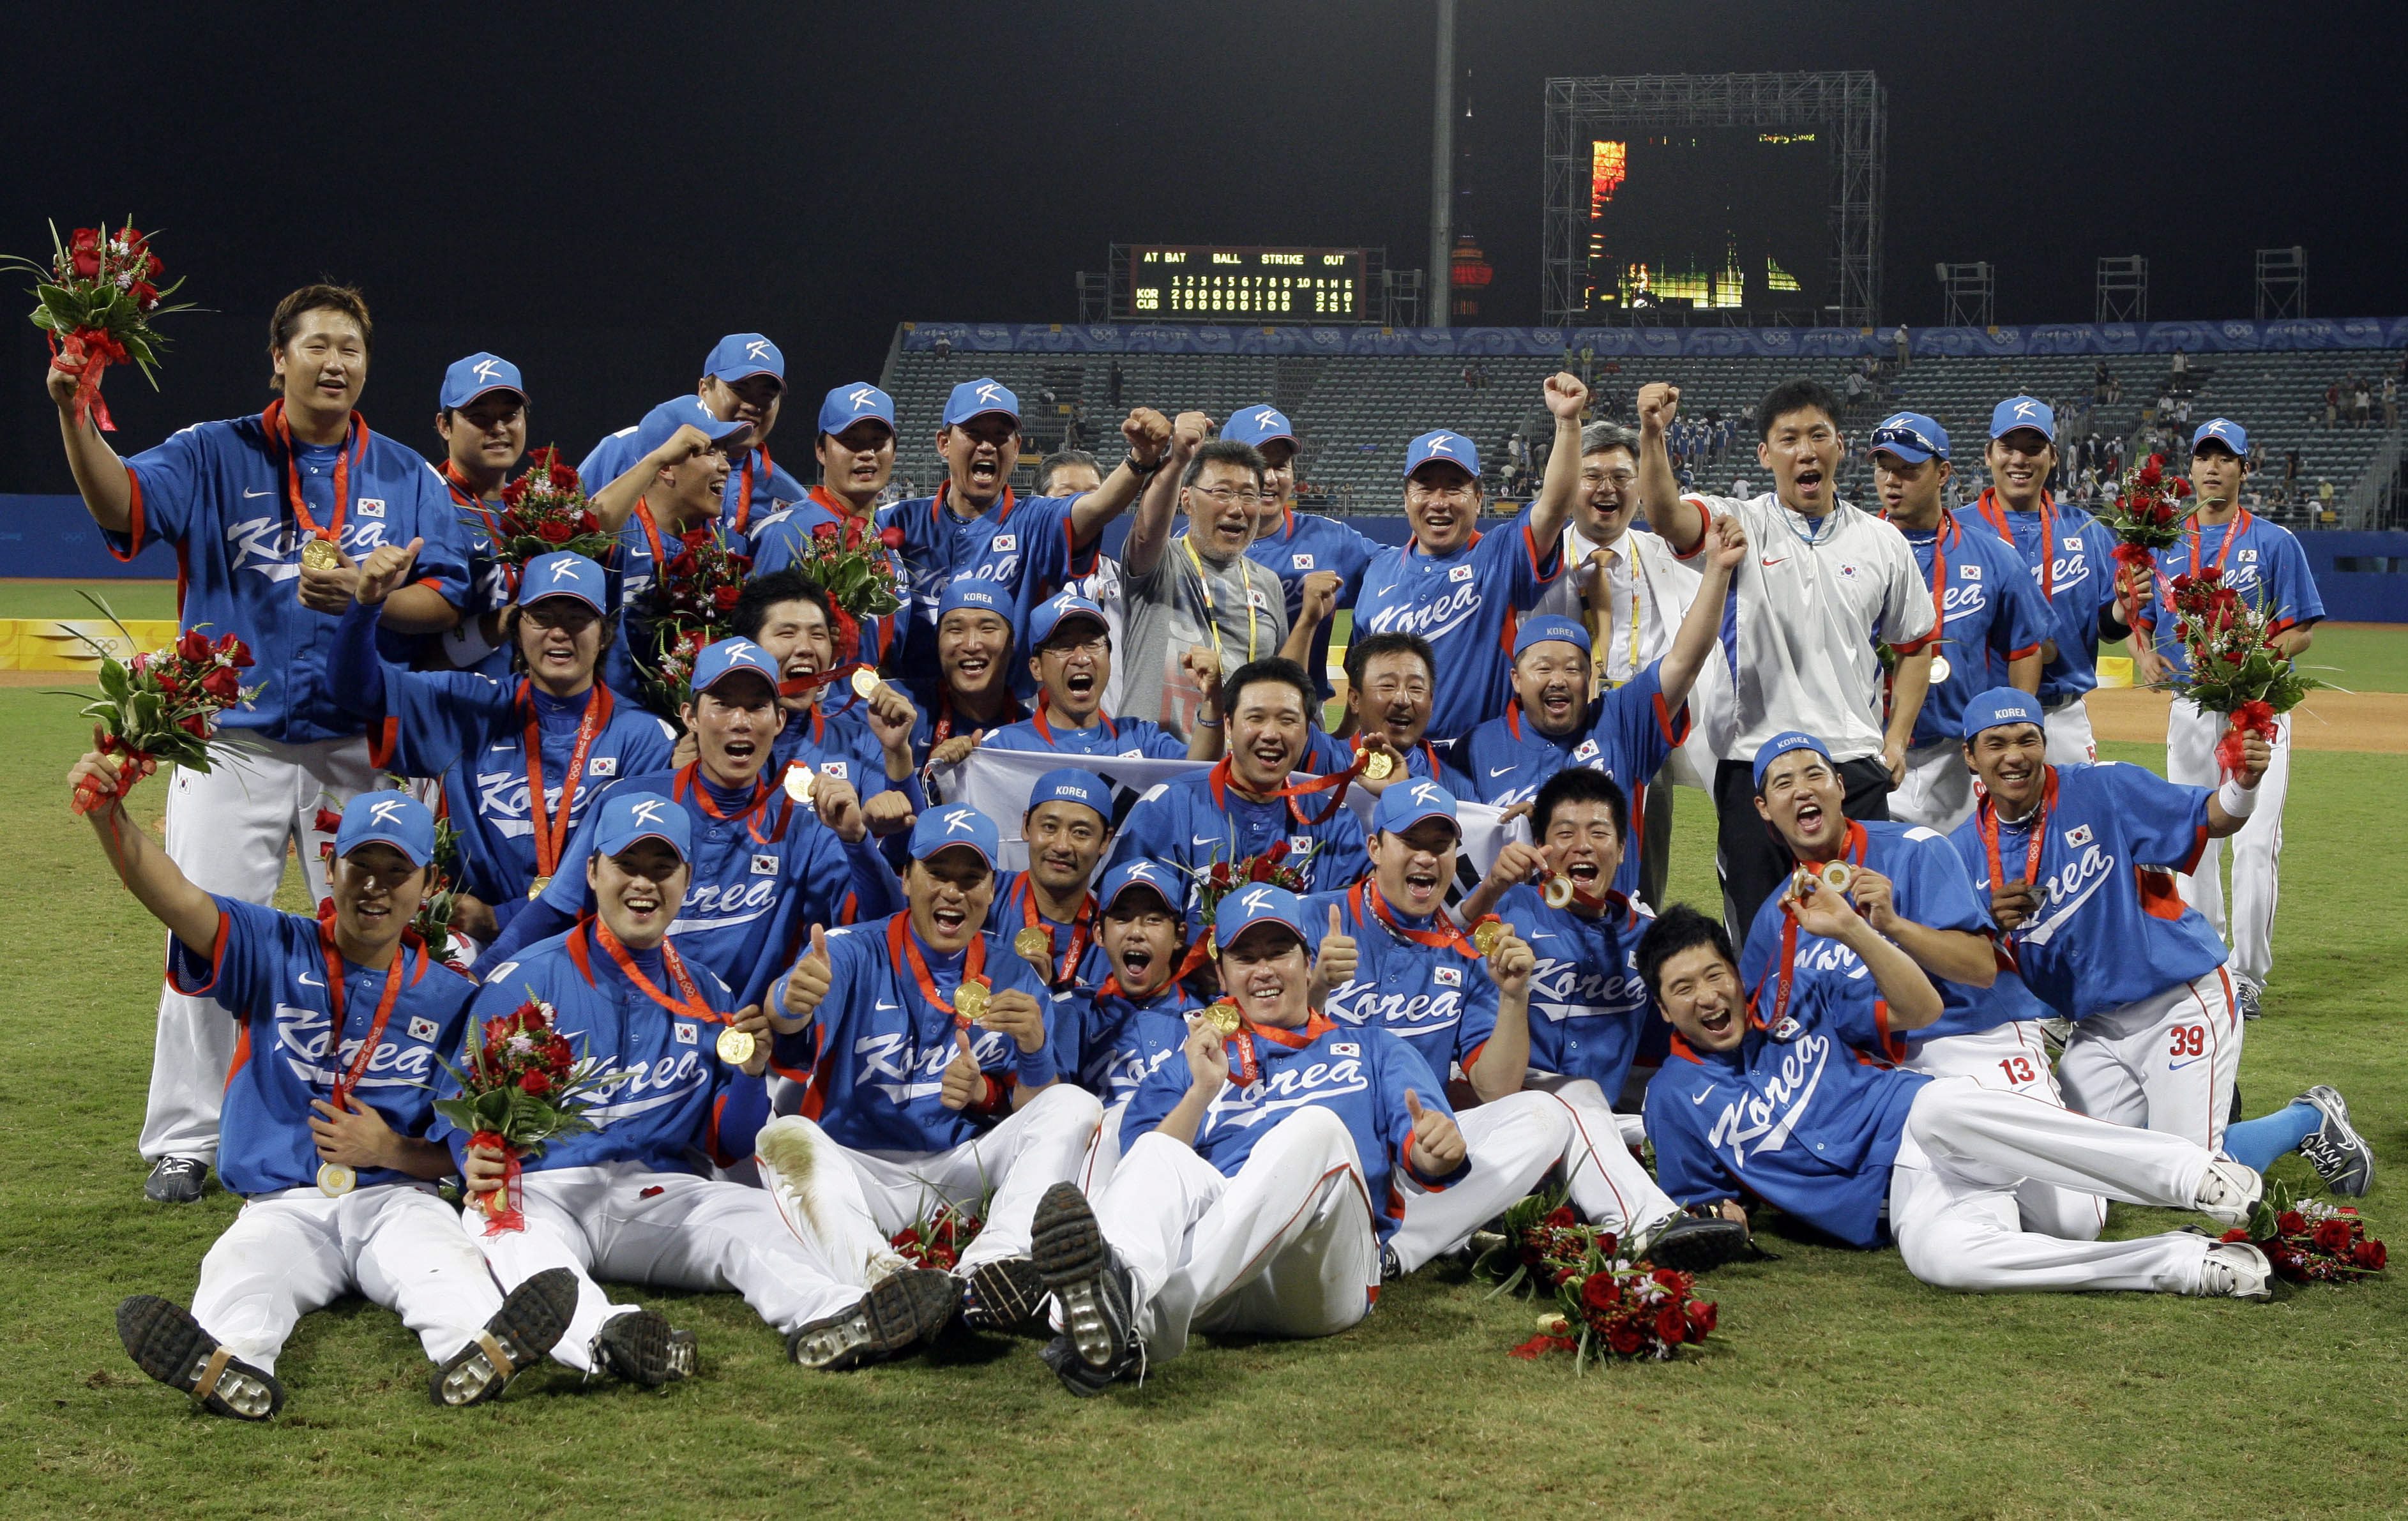 South Korea players celebrate with their gold medals after beating Cuba 3-2 in the gold medal baseball game at the Beijing 2008 Olympics in Beijing, Saturday, Aug. 23, 2008. (AP Photo/Kathy Willens)